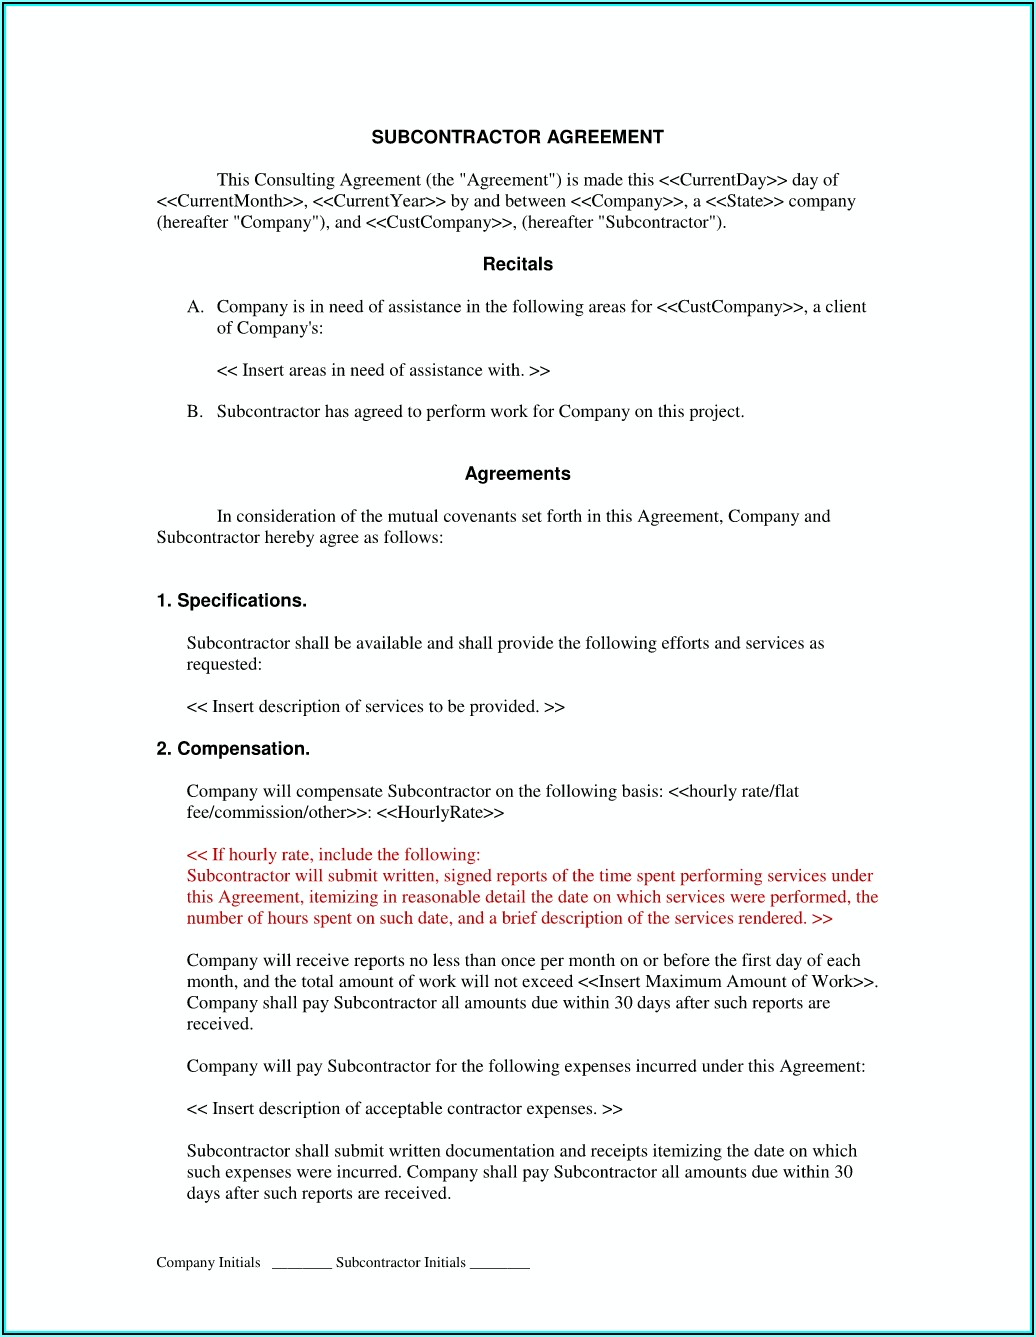 Subcontractor Agreement Template For Professional Services Uk